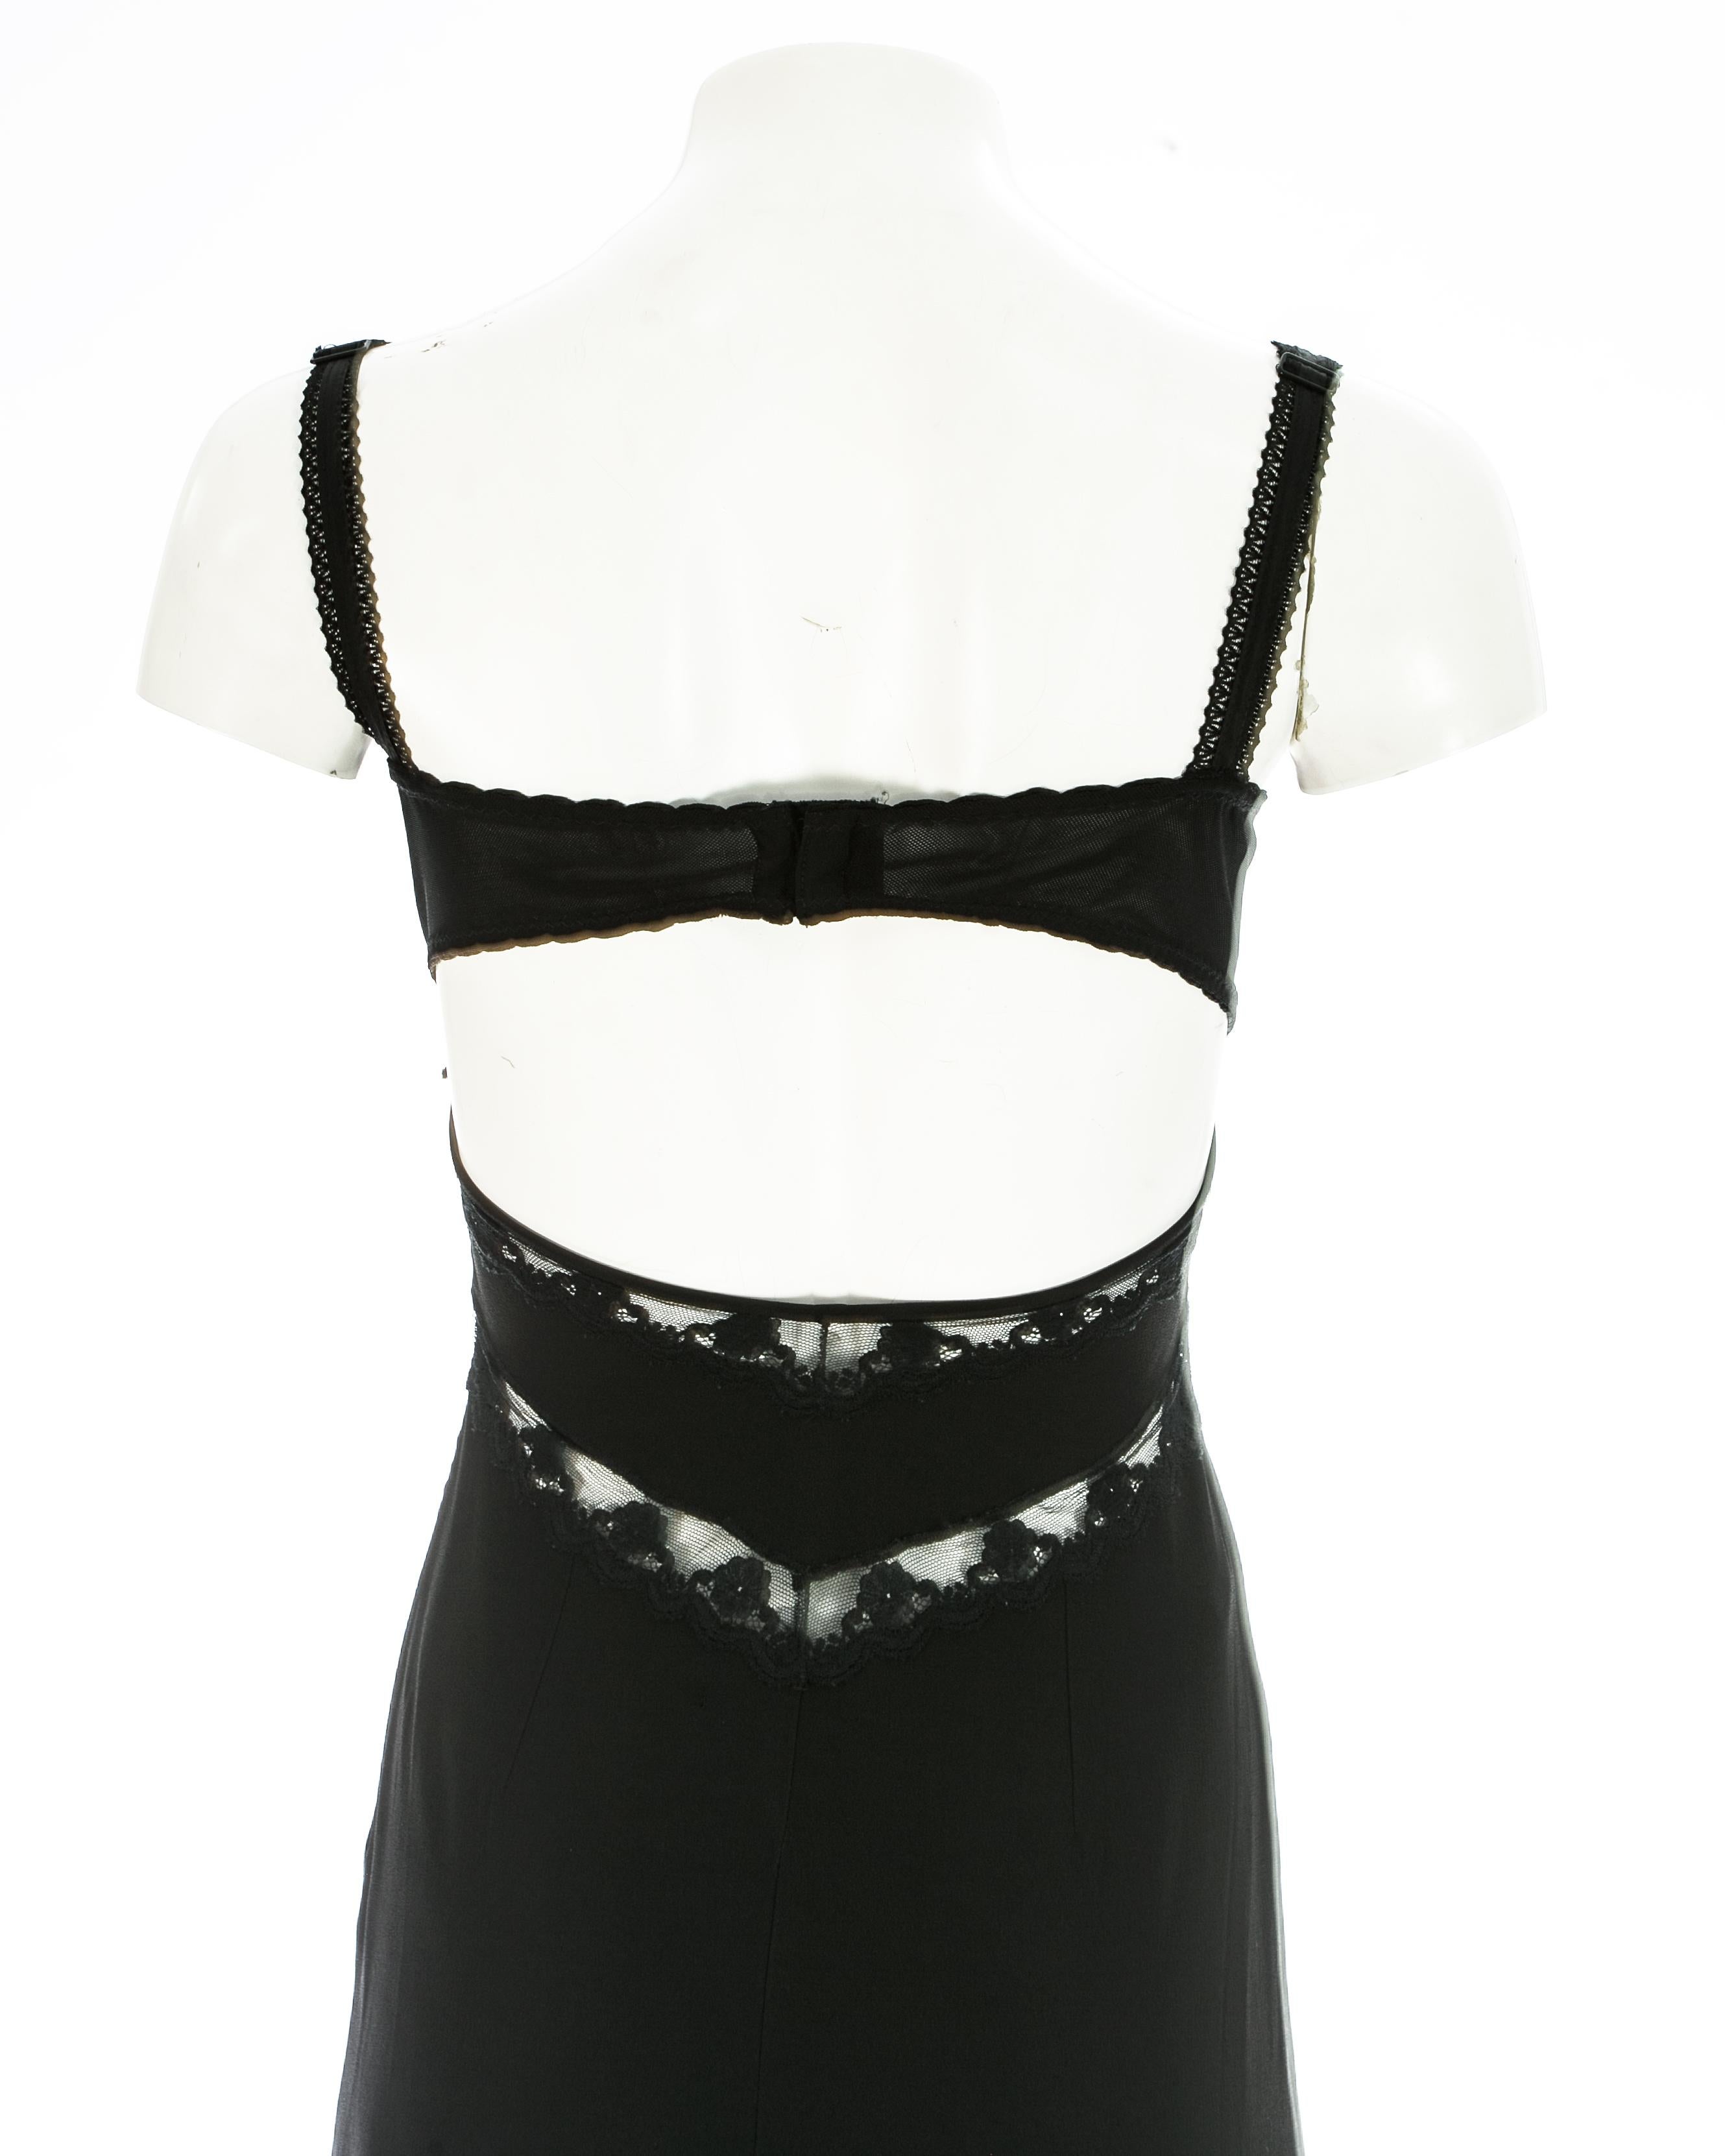 Dolce & Gabbana black crepe evening dress with lace cut outs and bra, A/W 1997 For Sale 1